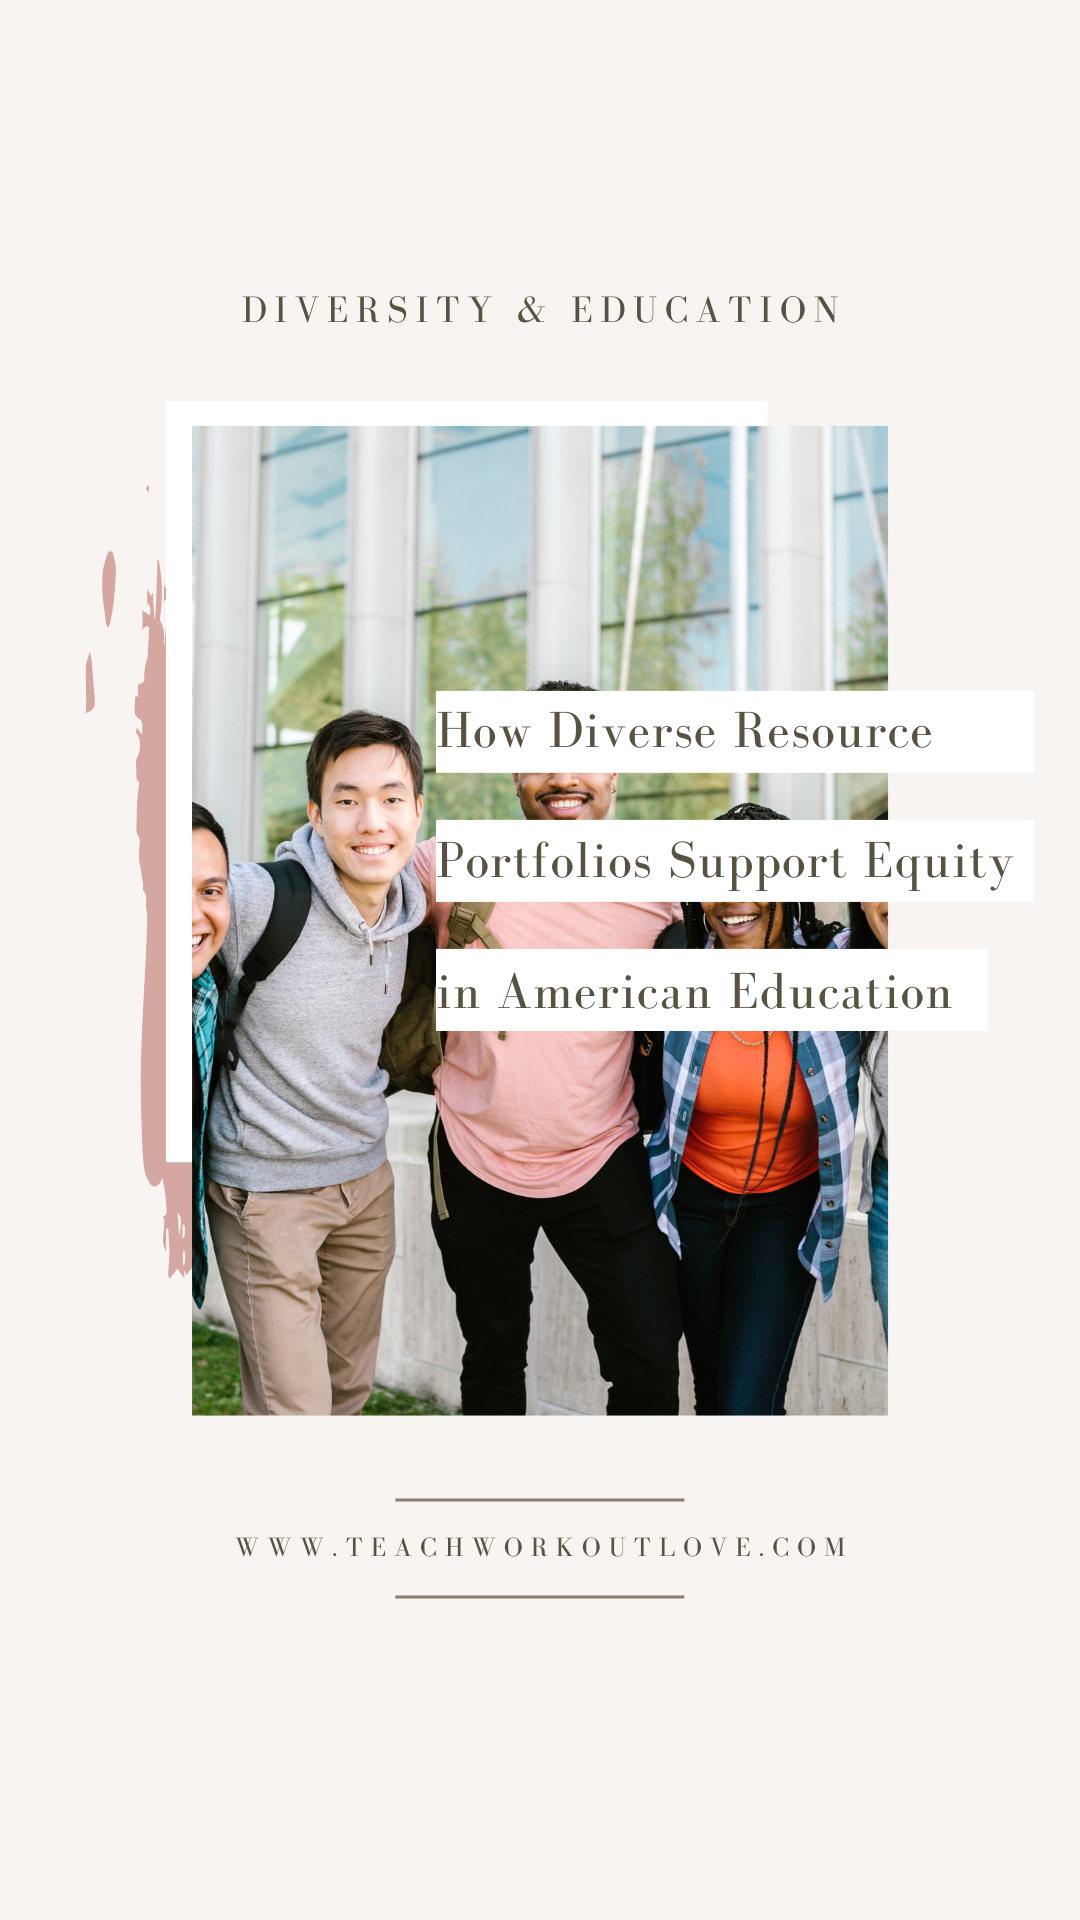 In this article, we examine how diverse resource portfolios can help make the American educational system more equitable and accessible.